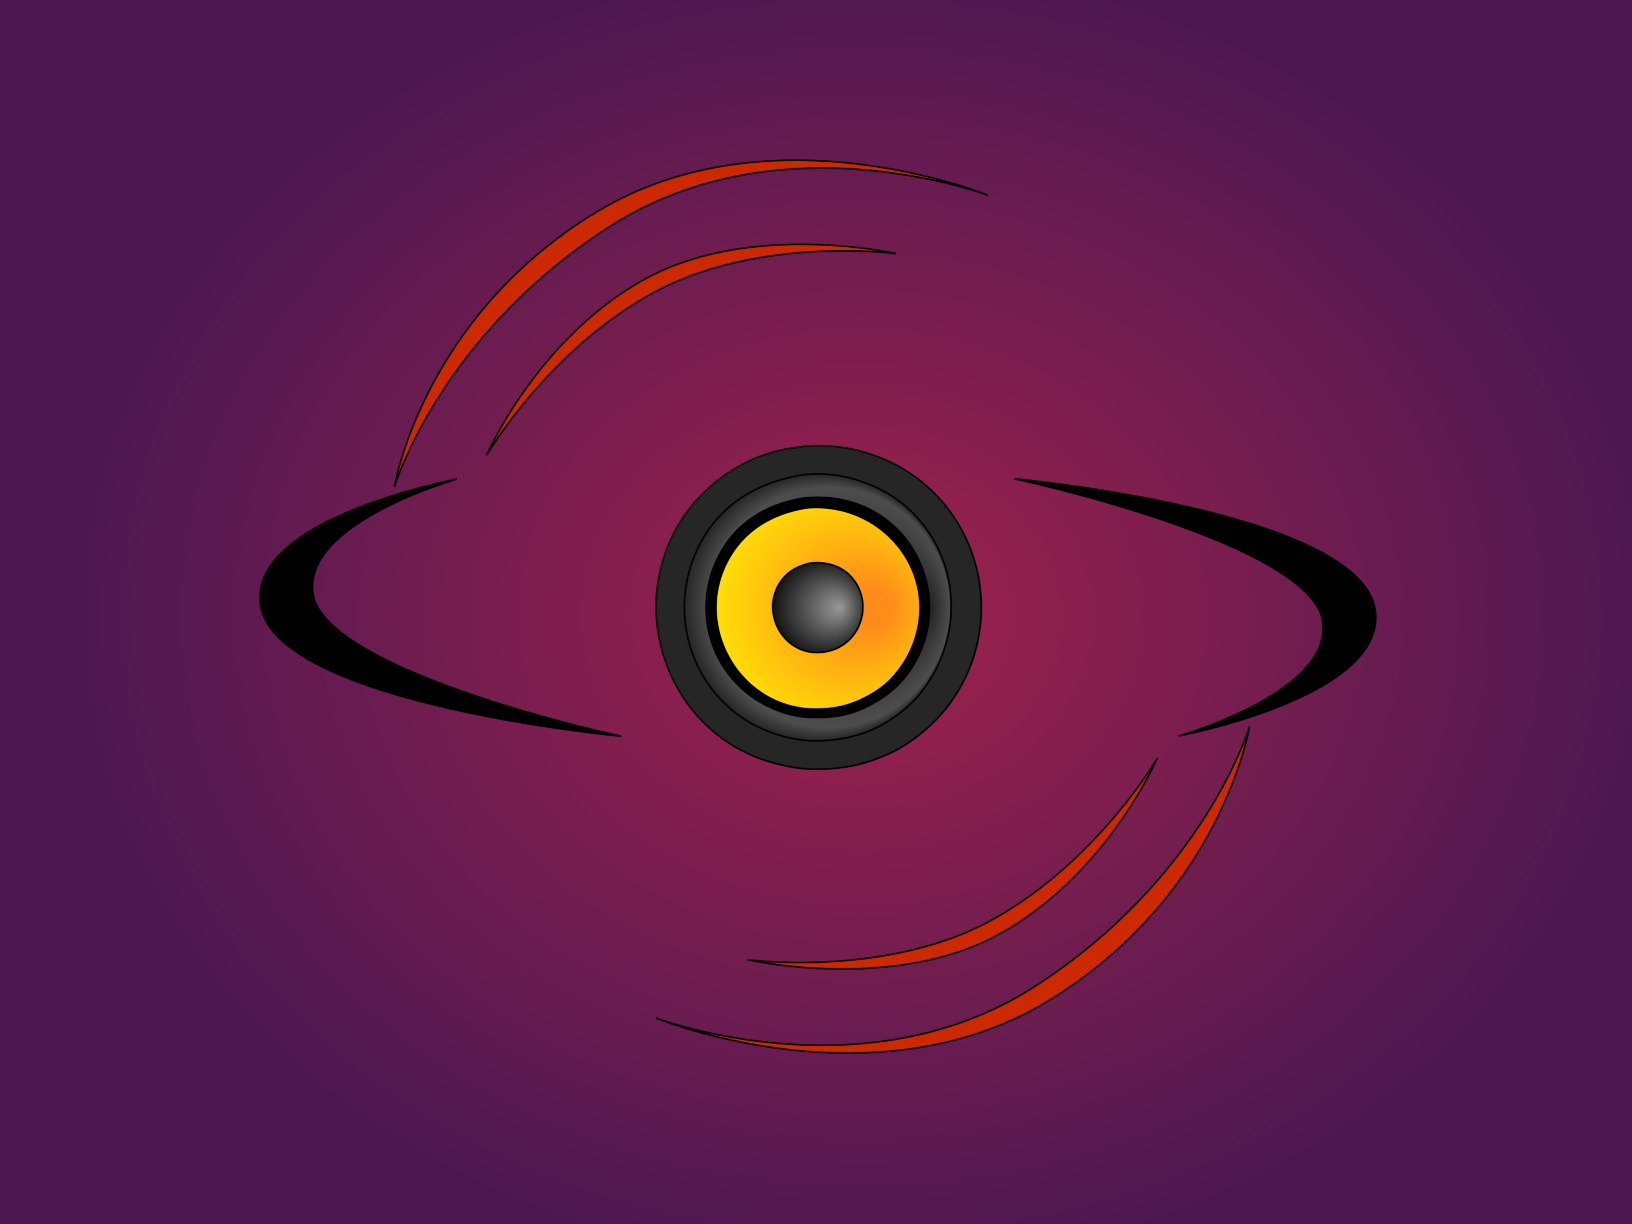 REGARTS logo. An eye is formed by a 3D ring around a speaker membrane. Two red wave ripples are originating from the speaker and going north-west and south-east (2 partial circles in each direction). The background is a radial gradient of purple and